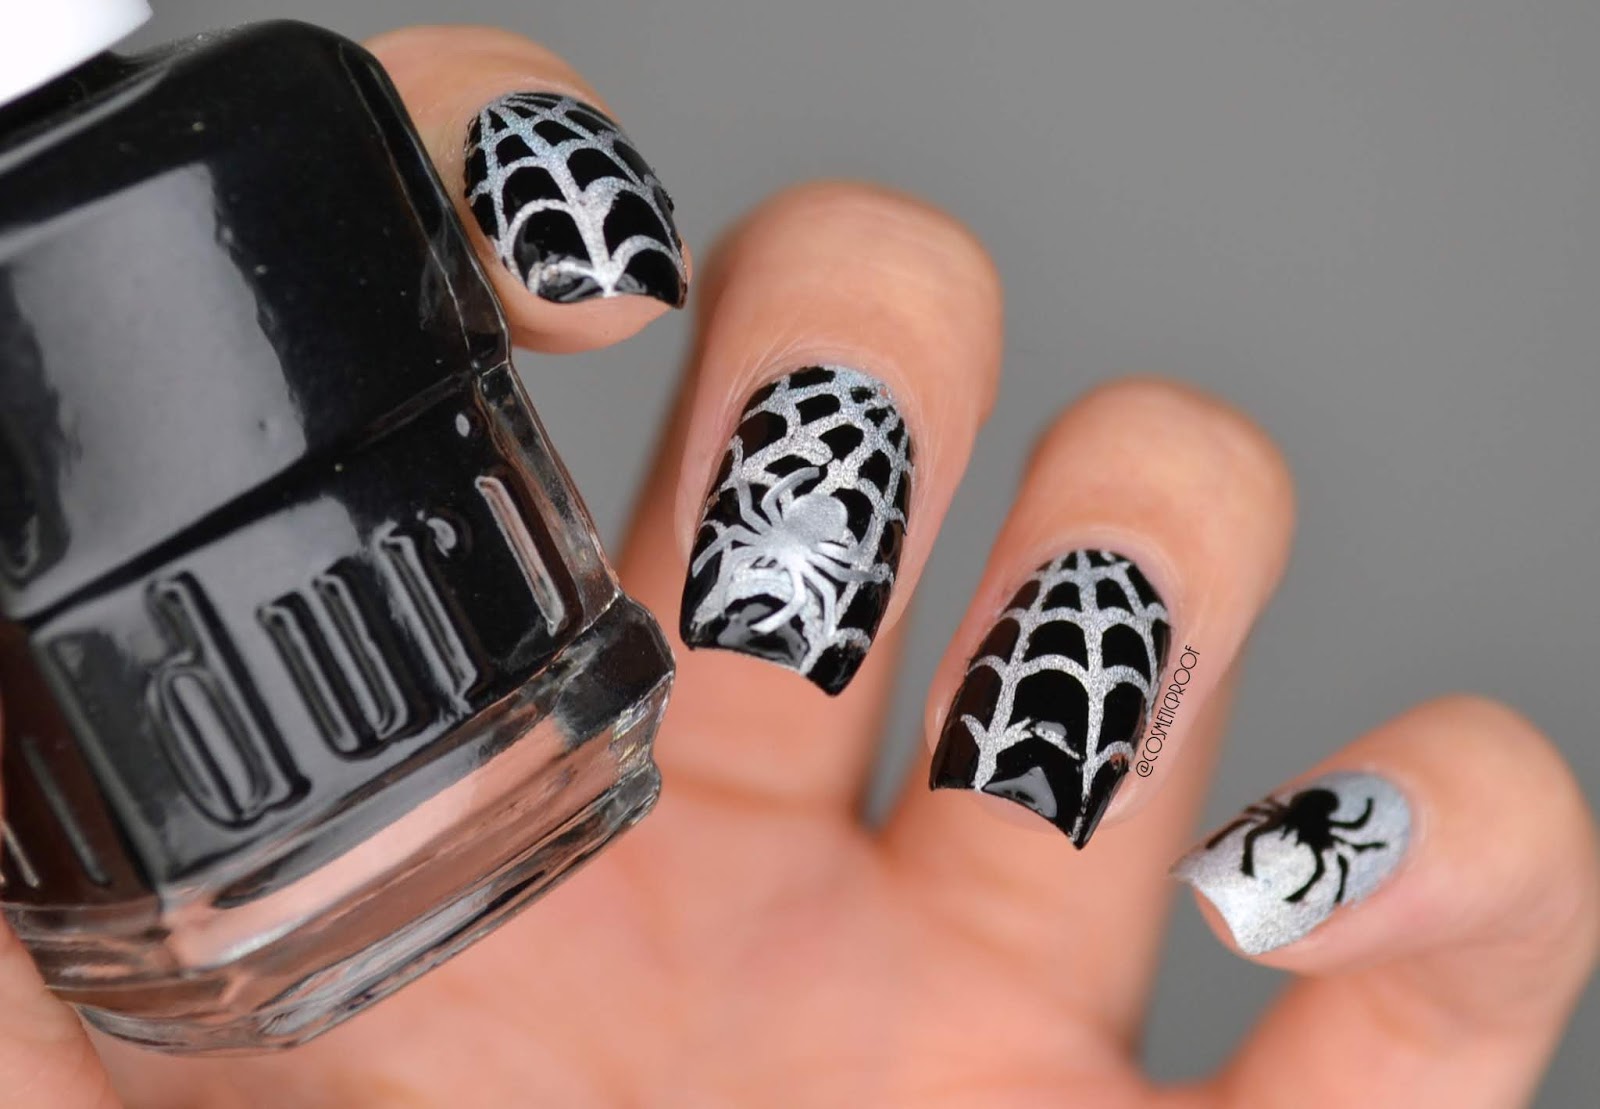 1. Spooky Spider Web Nails - wide 3